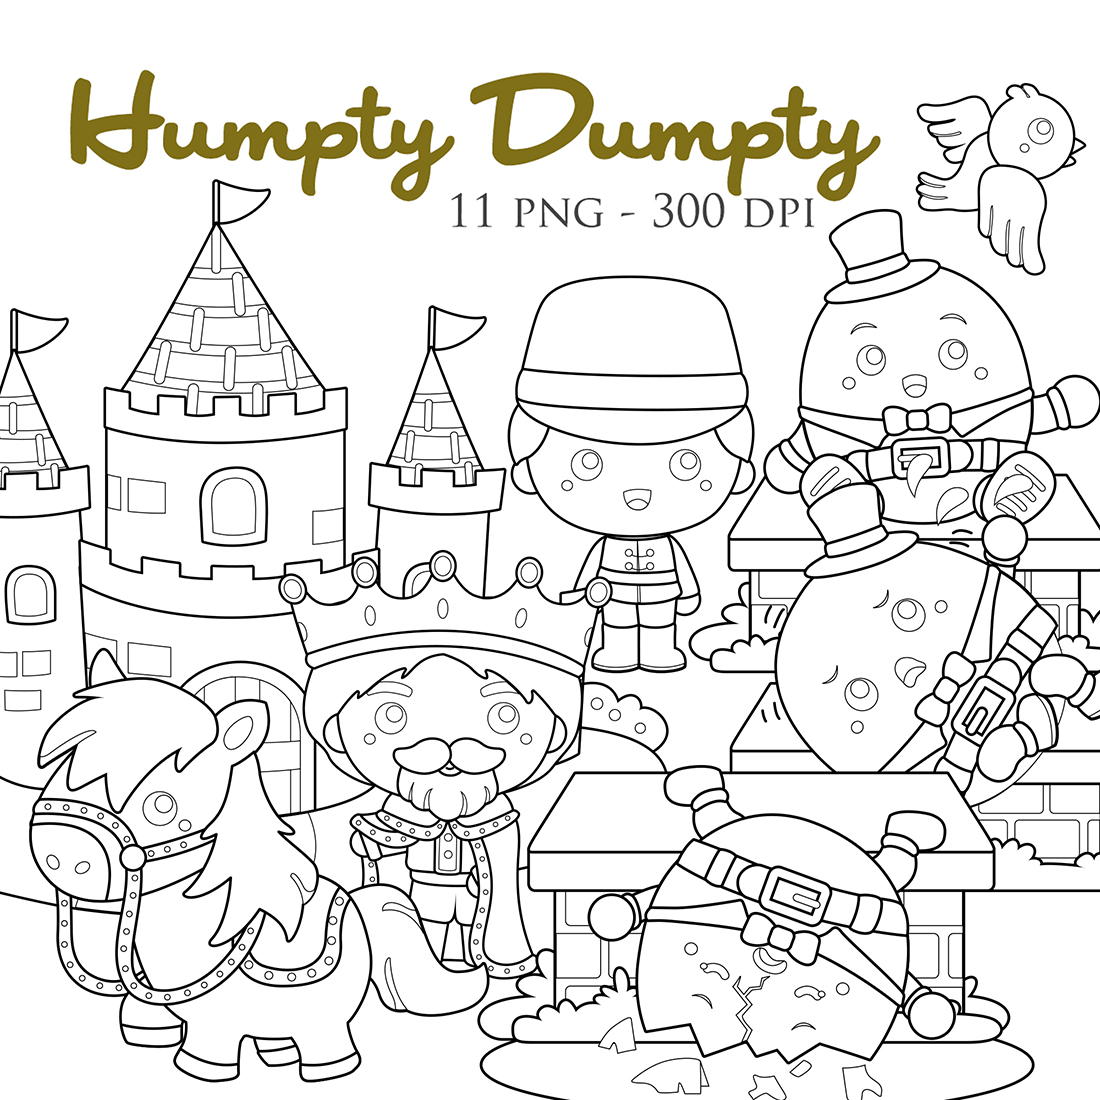 Humpty Dumpty Classic Rhymes Song Story Kids Colorful Scrapbook Digital Stamp cover image.